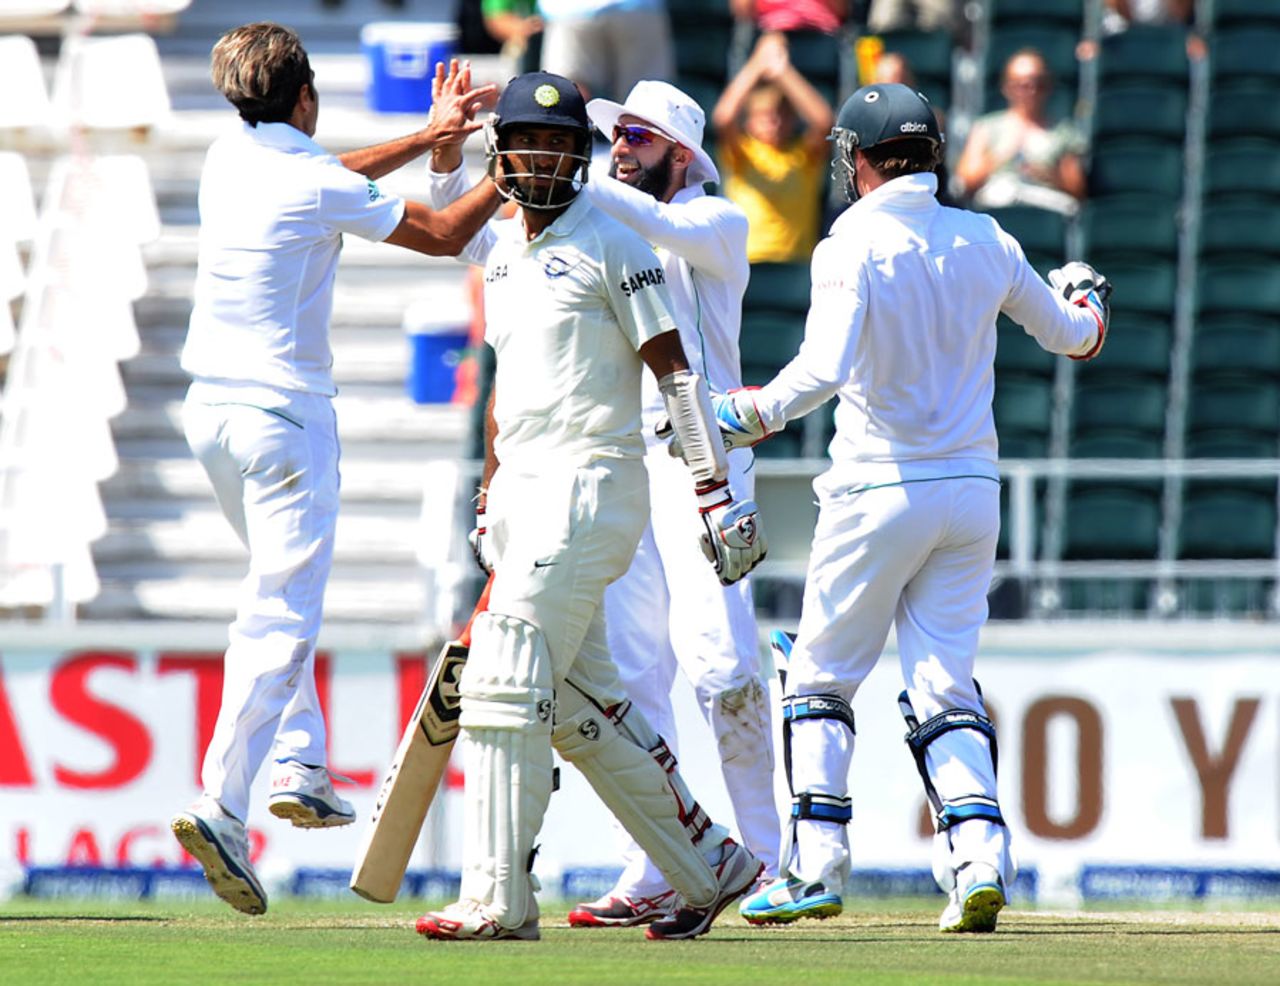 Cheteshwar Pujara was run out for 25, South Africa v India, 1st Test, Johannesburg, 1st day, December 18, 2013